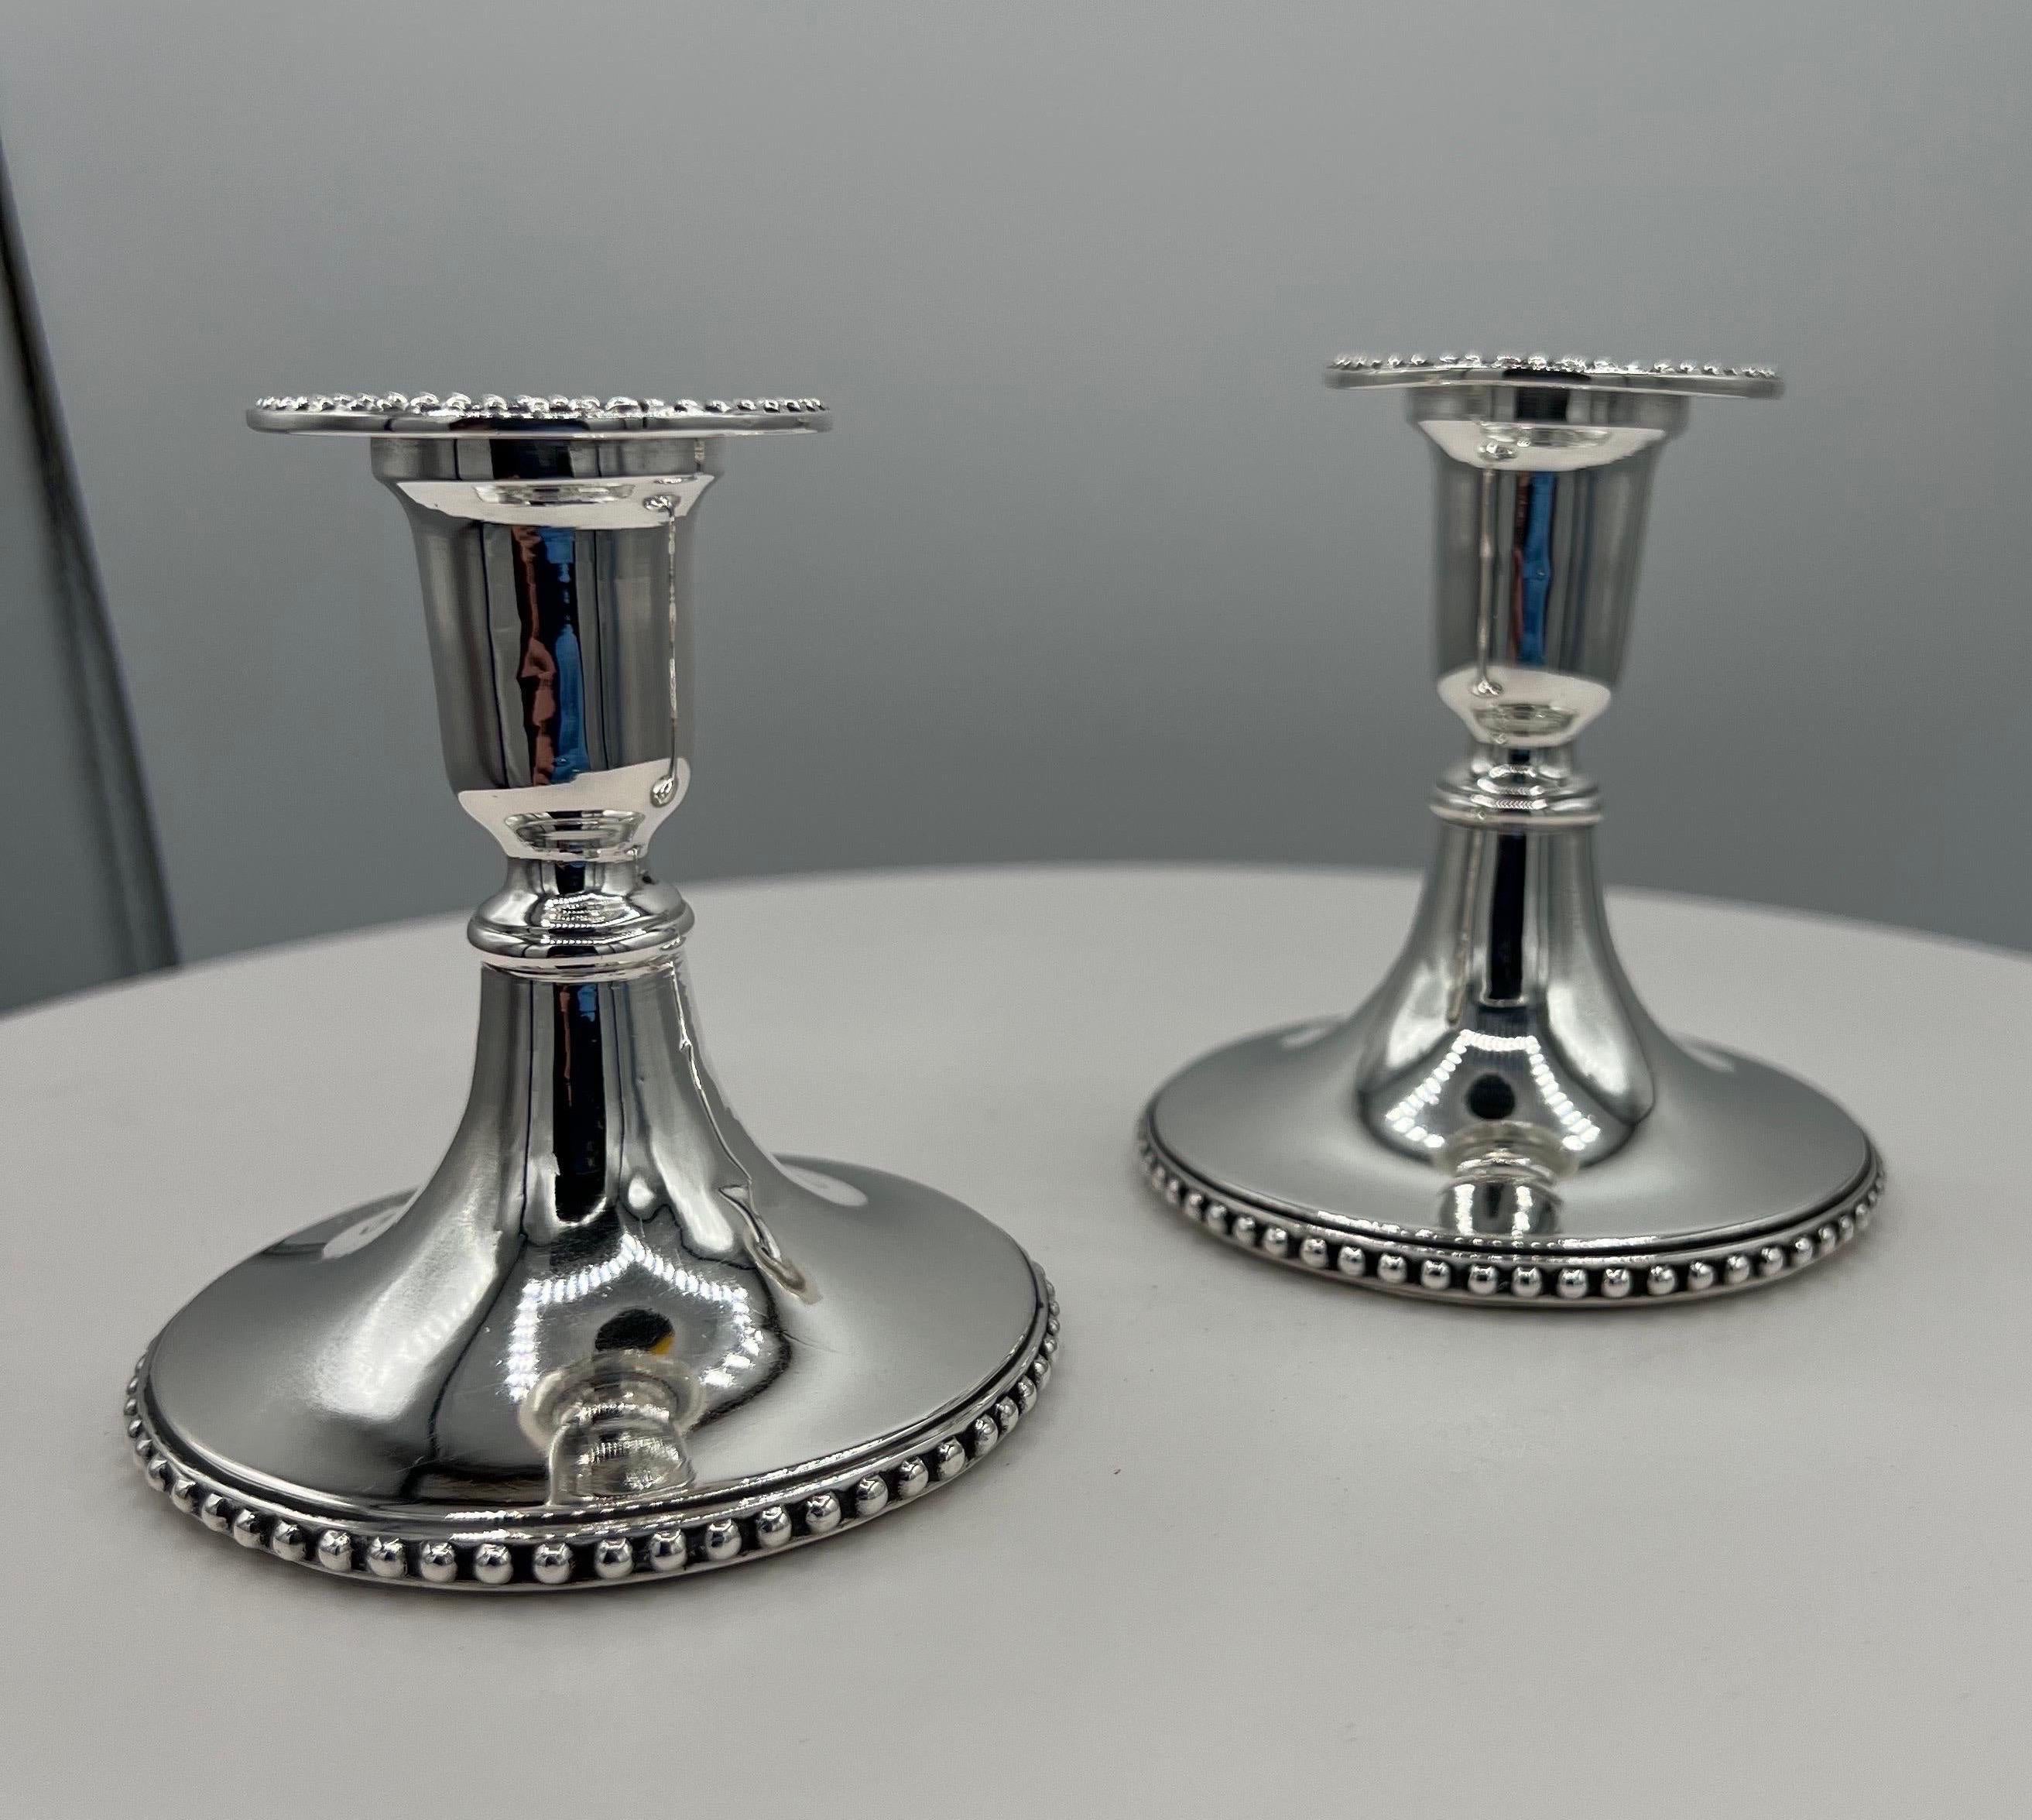 A Pair of Portuguese Sterling Silver Candle Sticks
Marked A. D'Abreu.